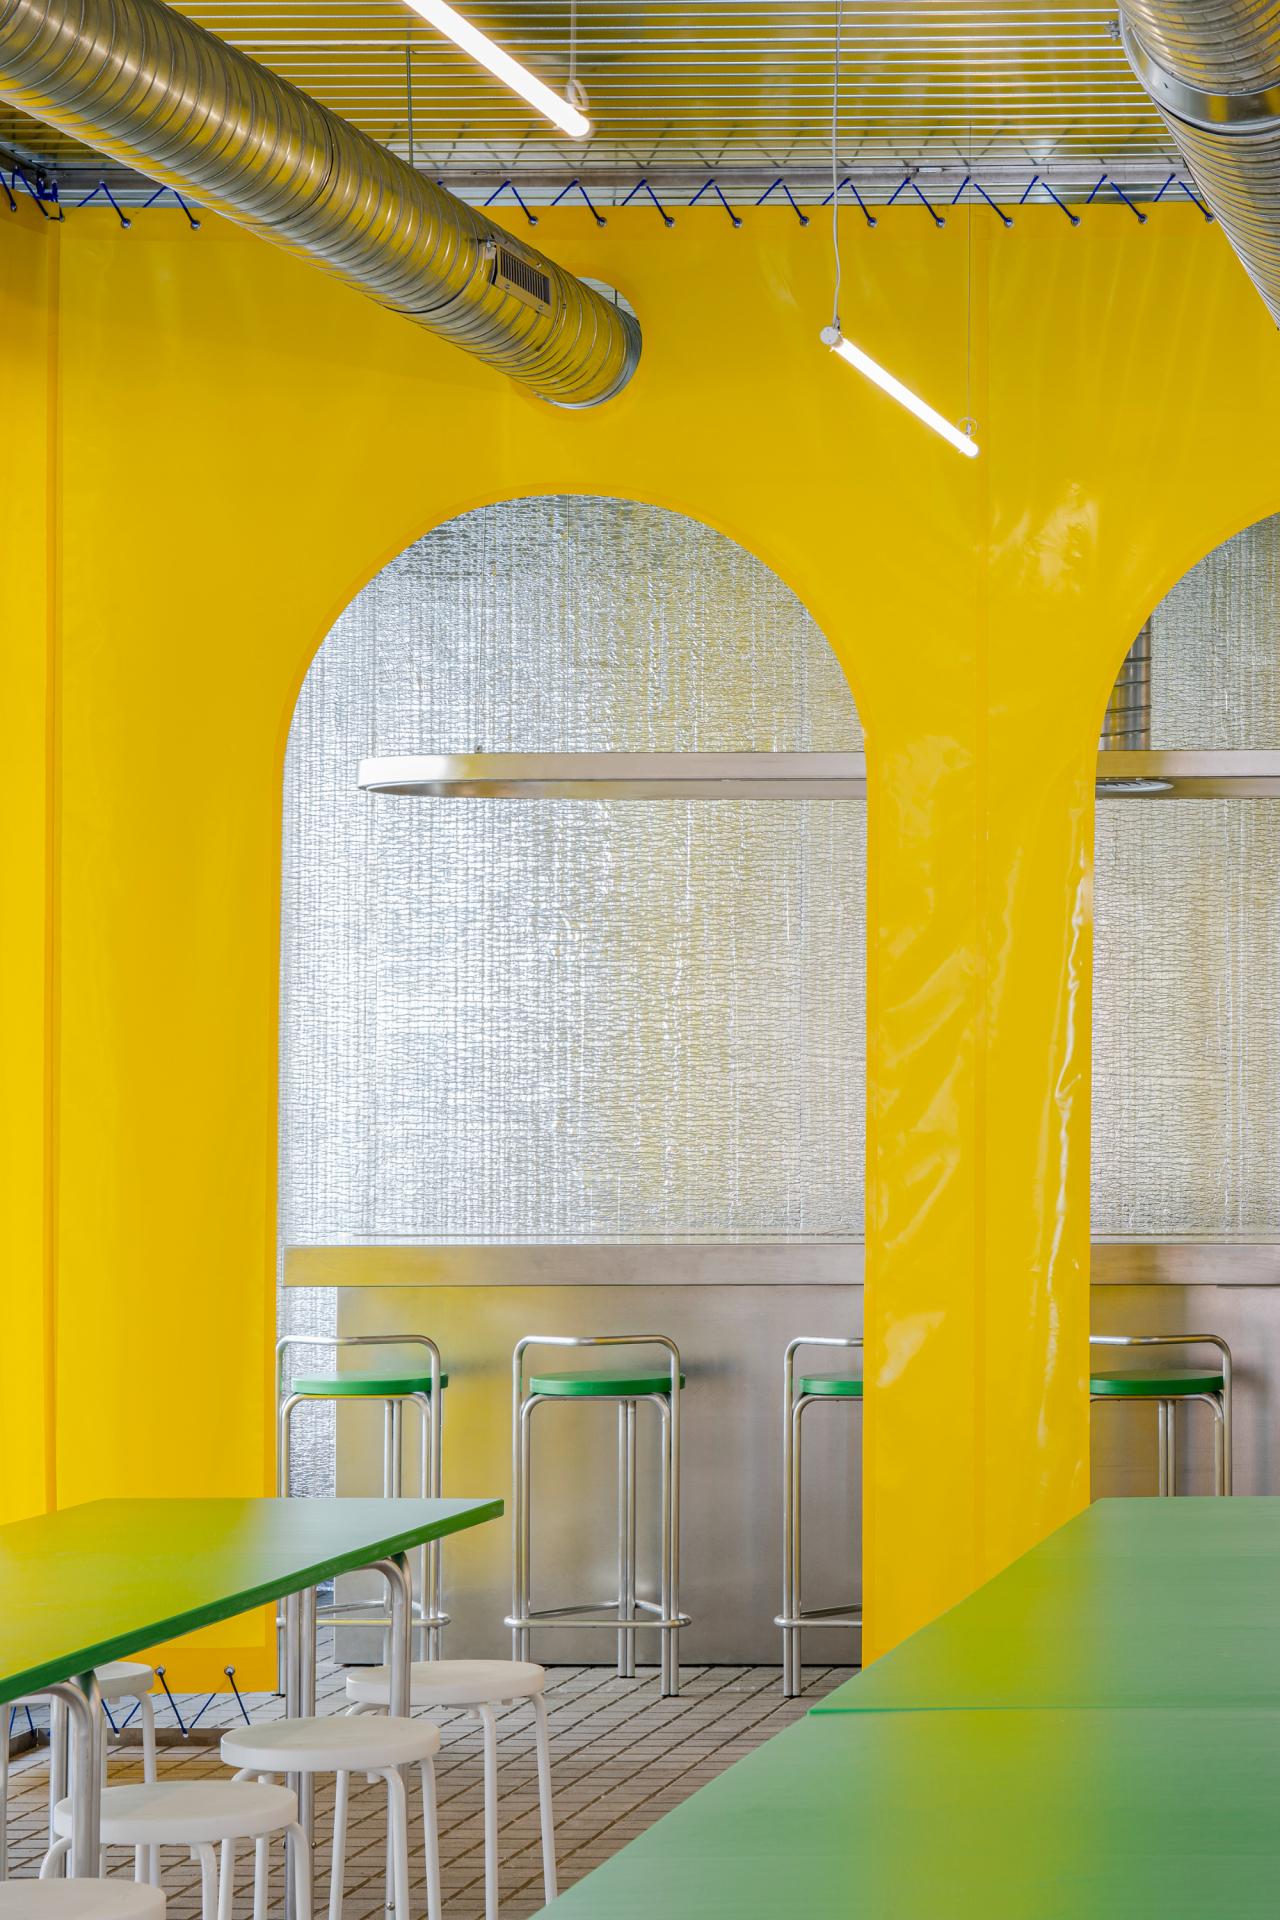 This burrito joint in Madrid gets a flavoursome makeover with plenty of street appeal